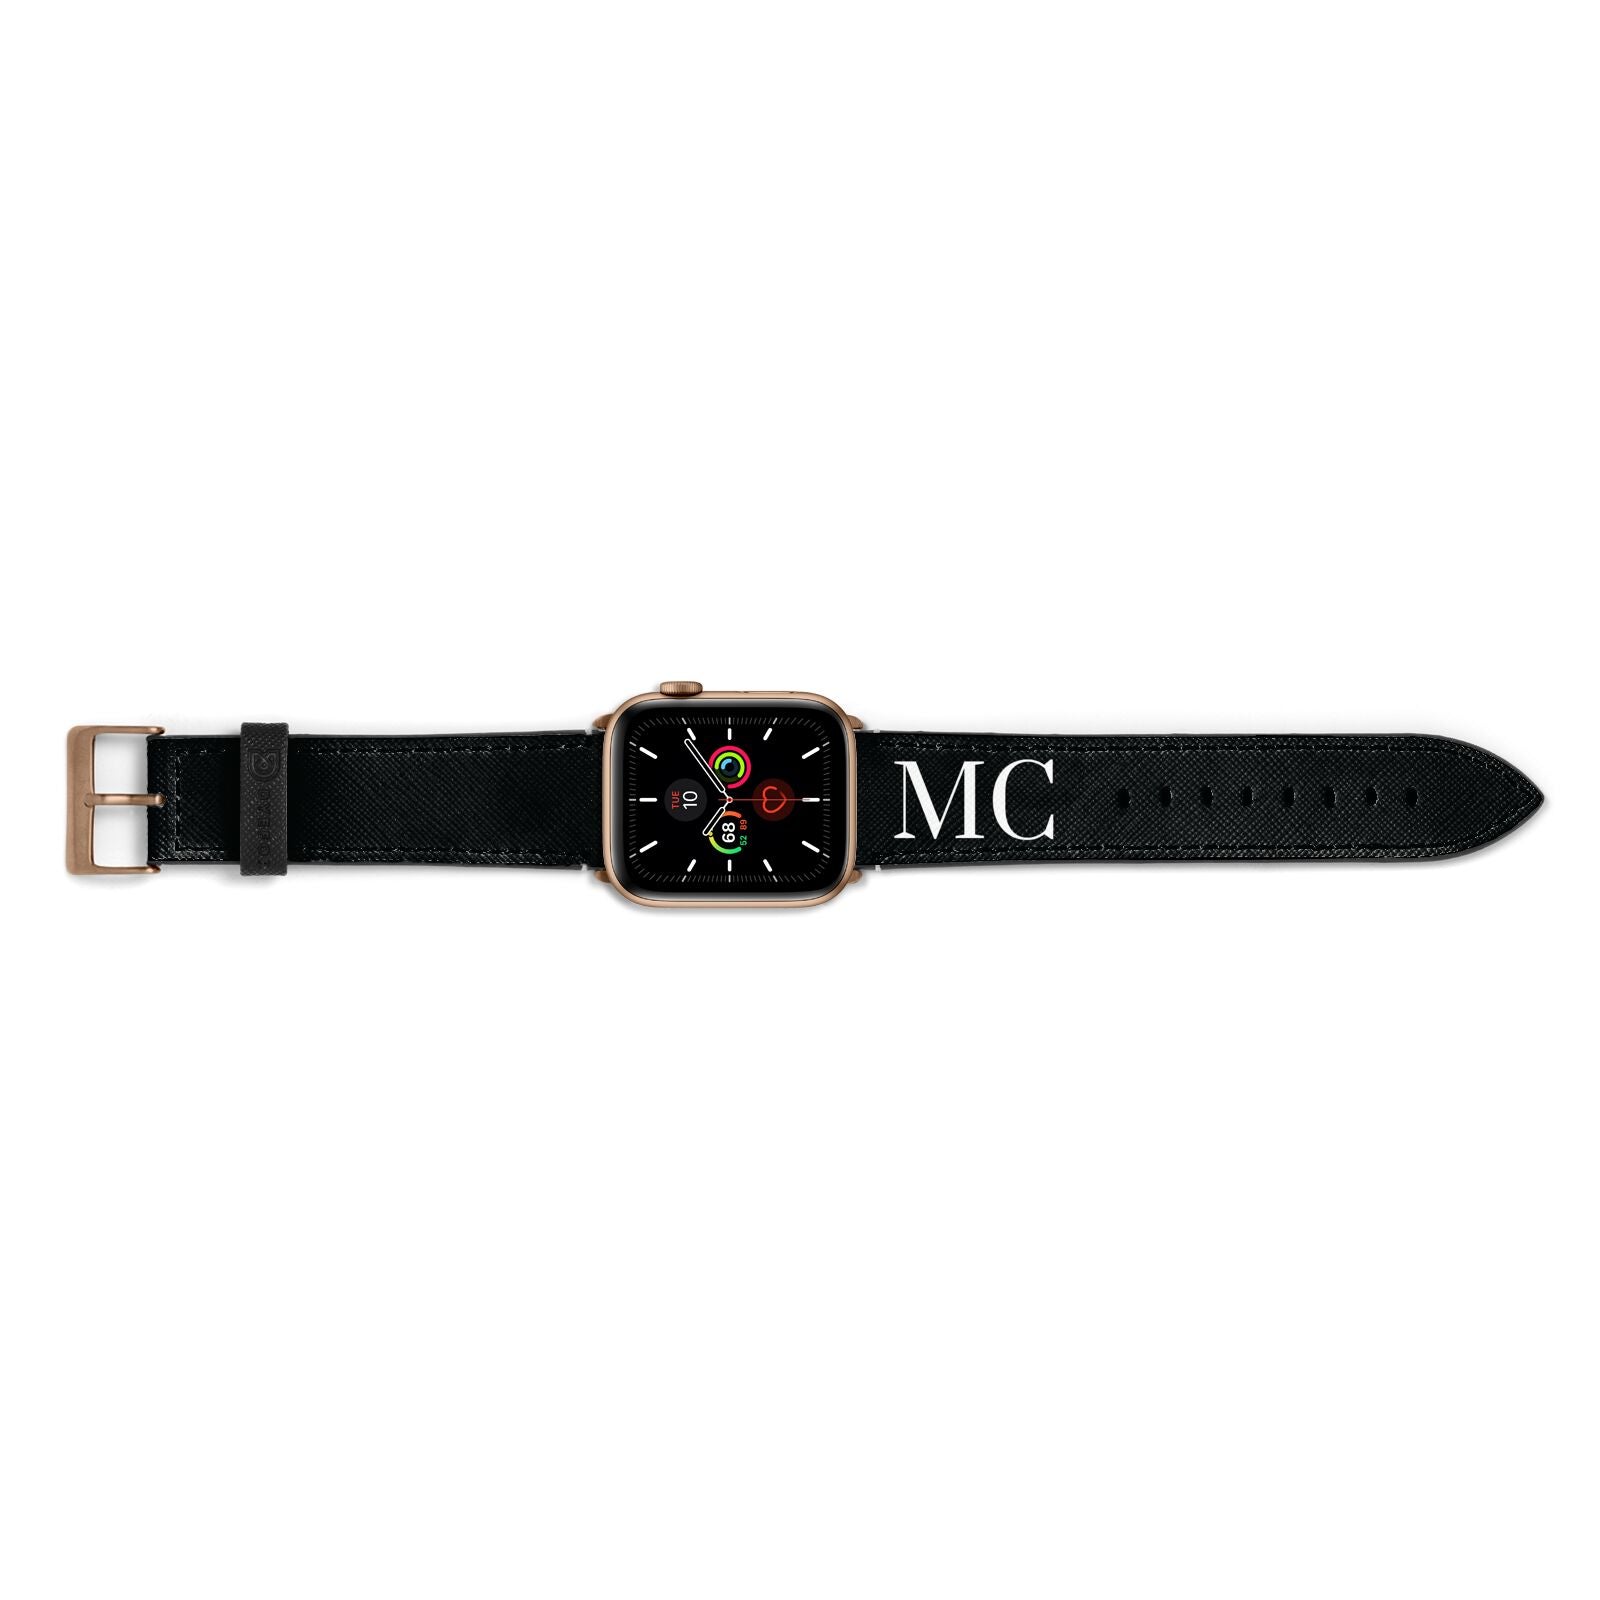 Initials Personalised 1 Apple Watch Strap Landscape Image Gold Hardware